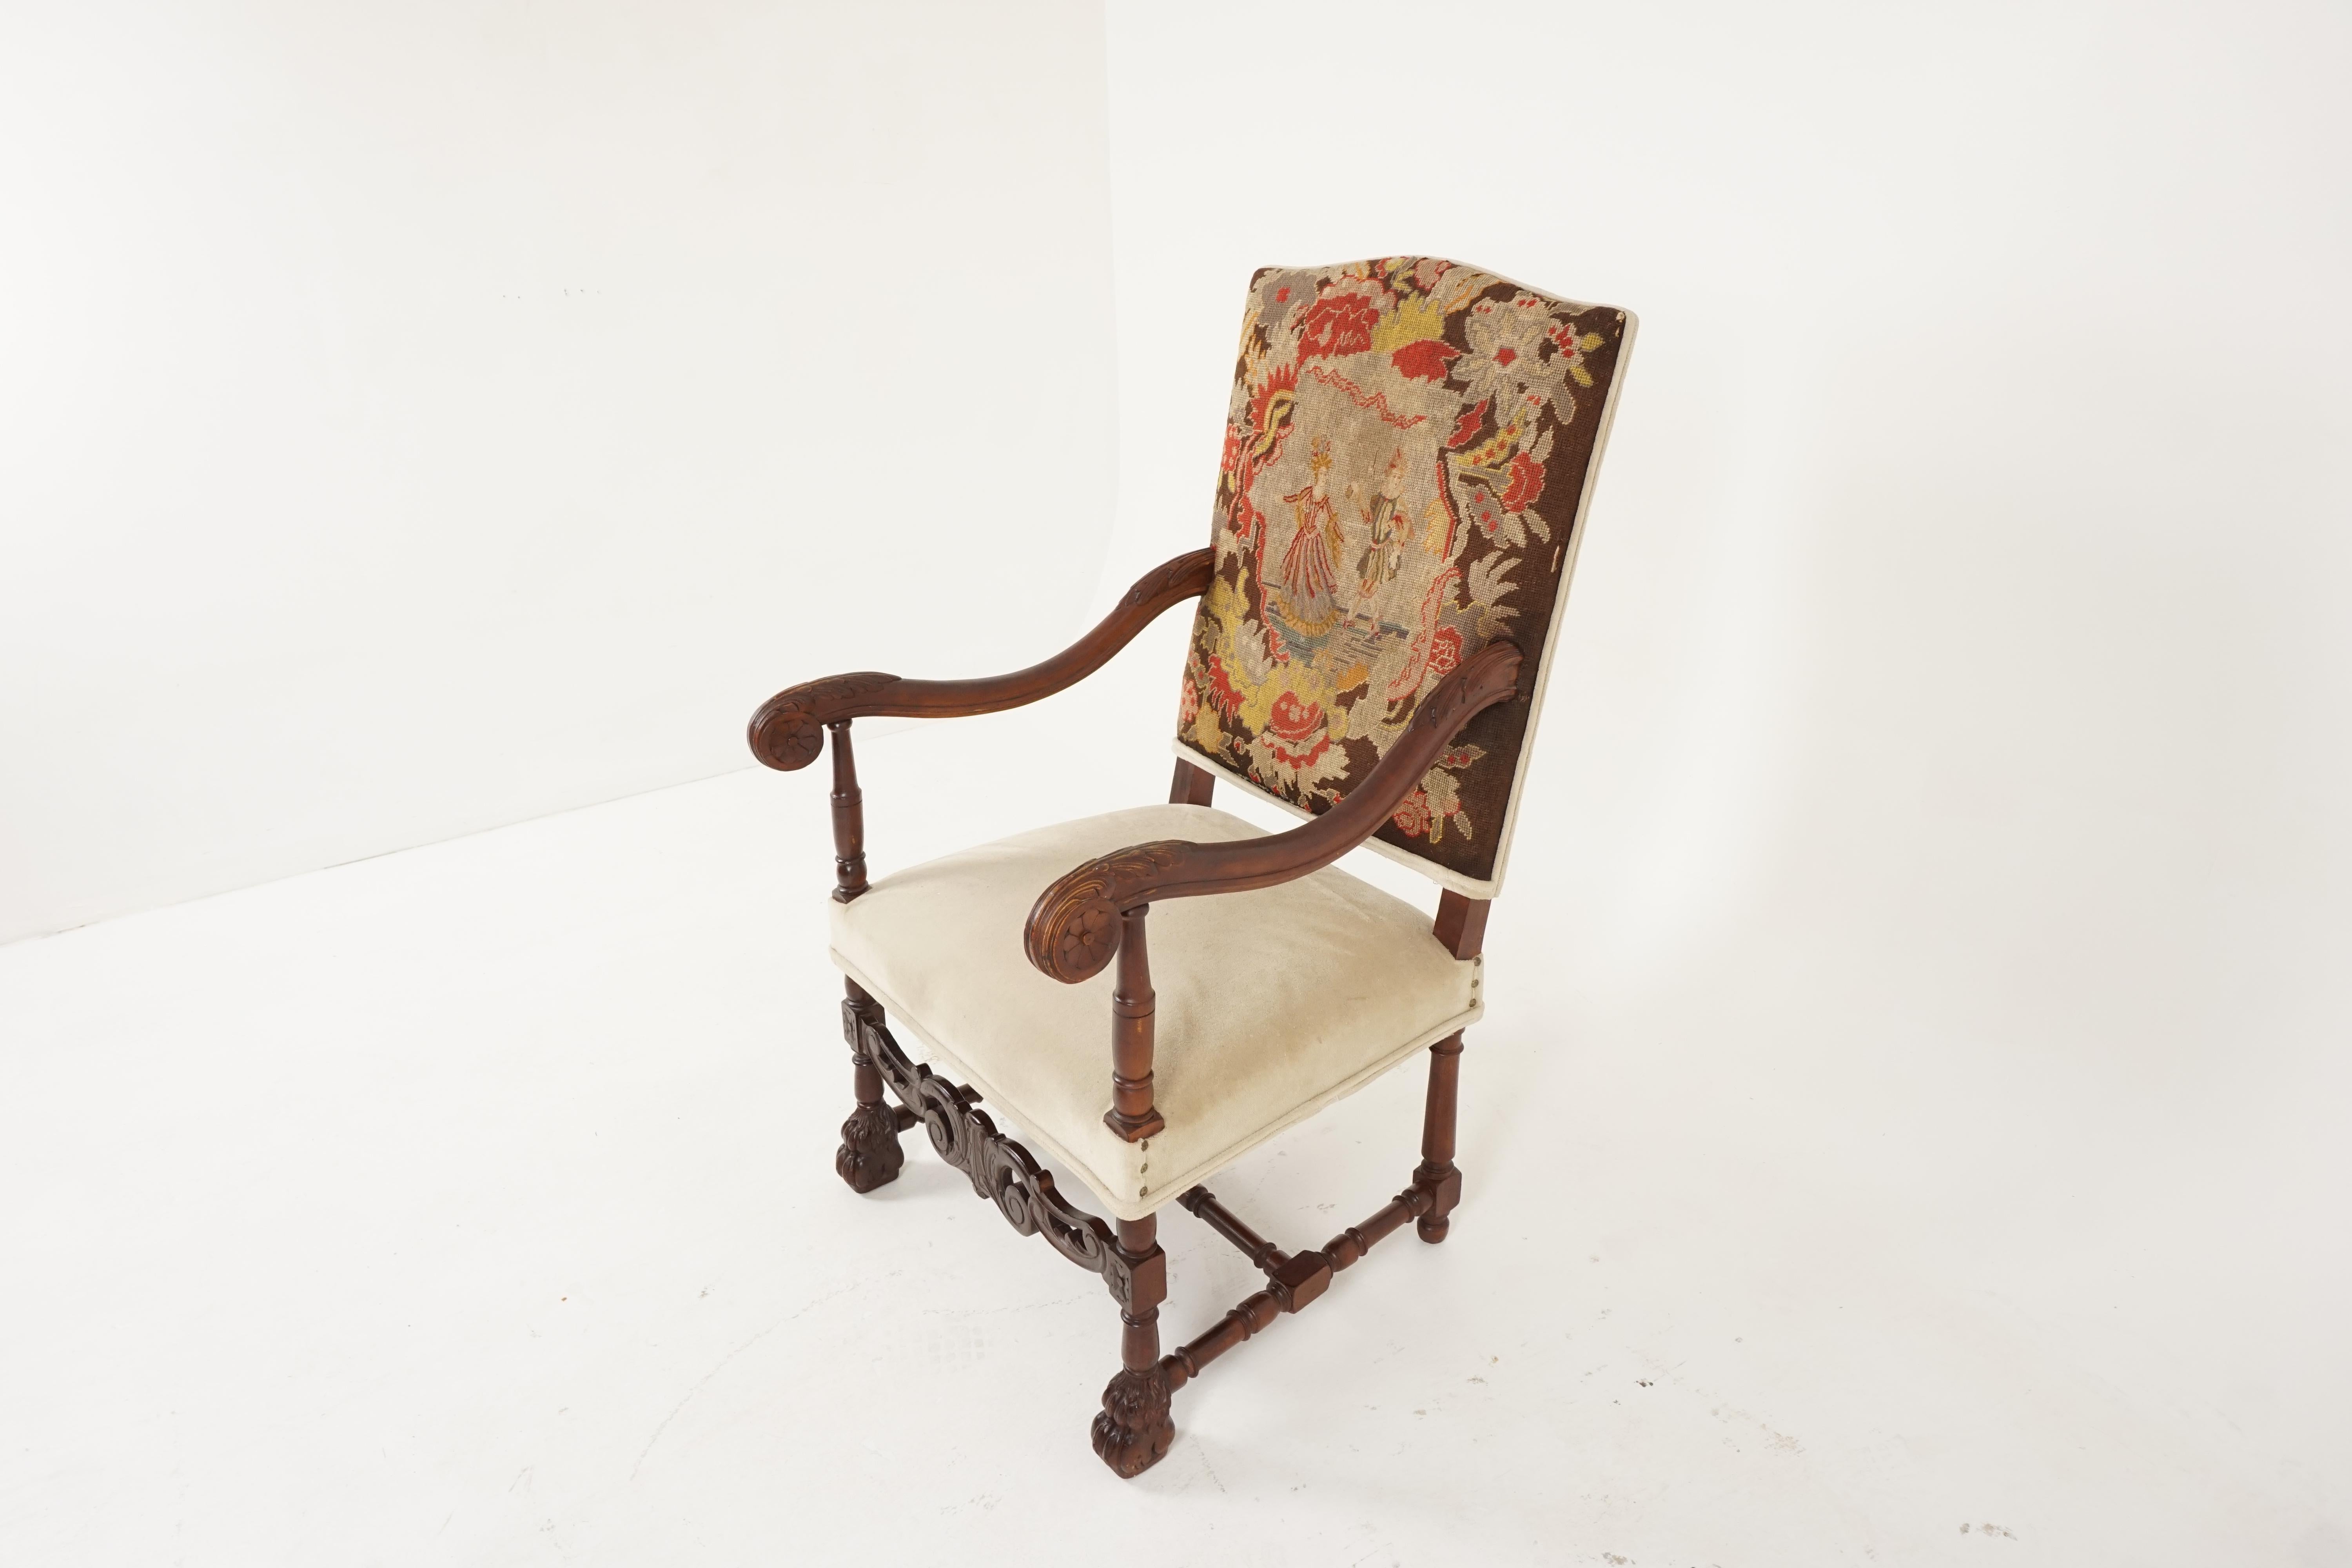 Antique Victorian open armchair, carved walnut, throne chair, Scotland 1880, H150

Scotland, 1880
Solid walnut
Original finish
High back with needlepoint
Down swept carved armrests with scroll end
An upholstered seat
On turned legs with carved feet